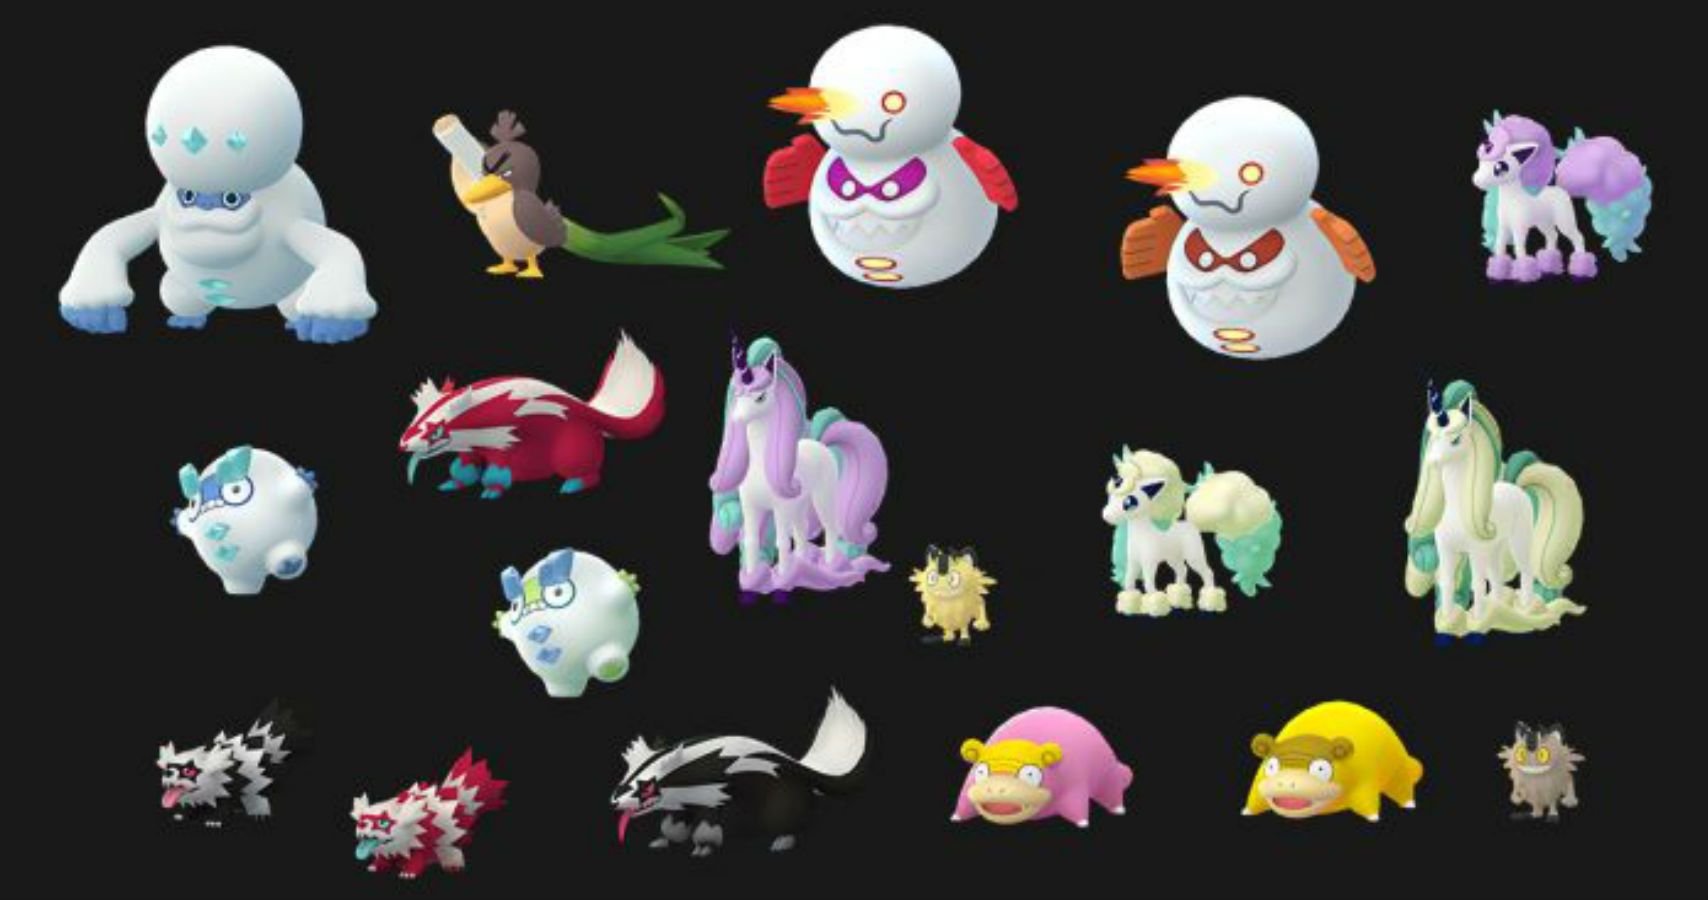 Every Galarian Form Pokémon Debuting During The Throwback Challenge Champion 2020 Event